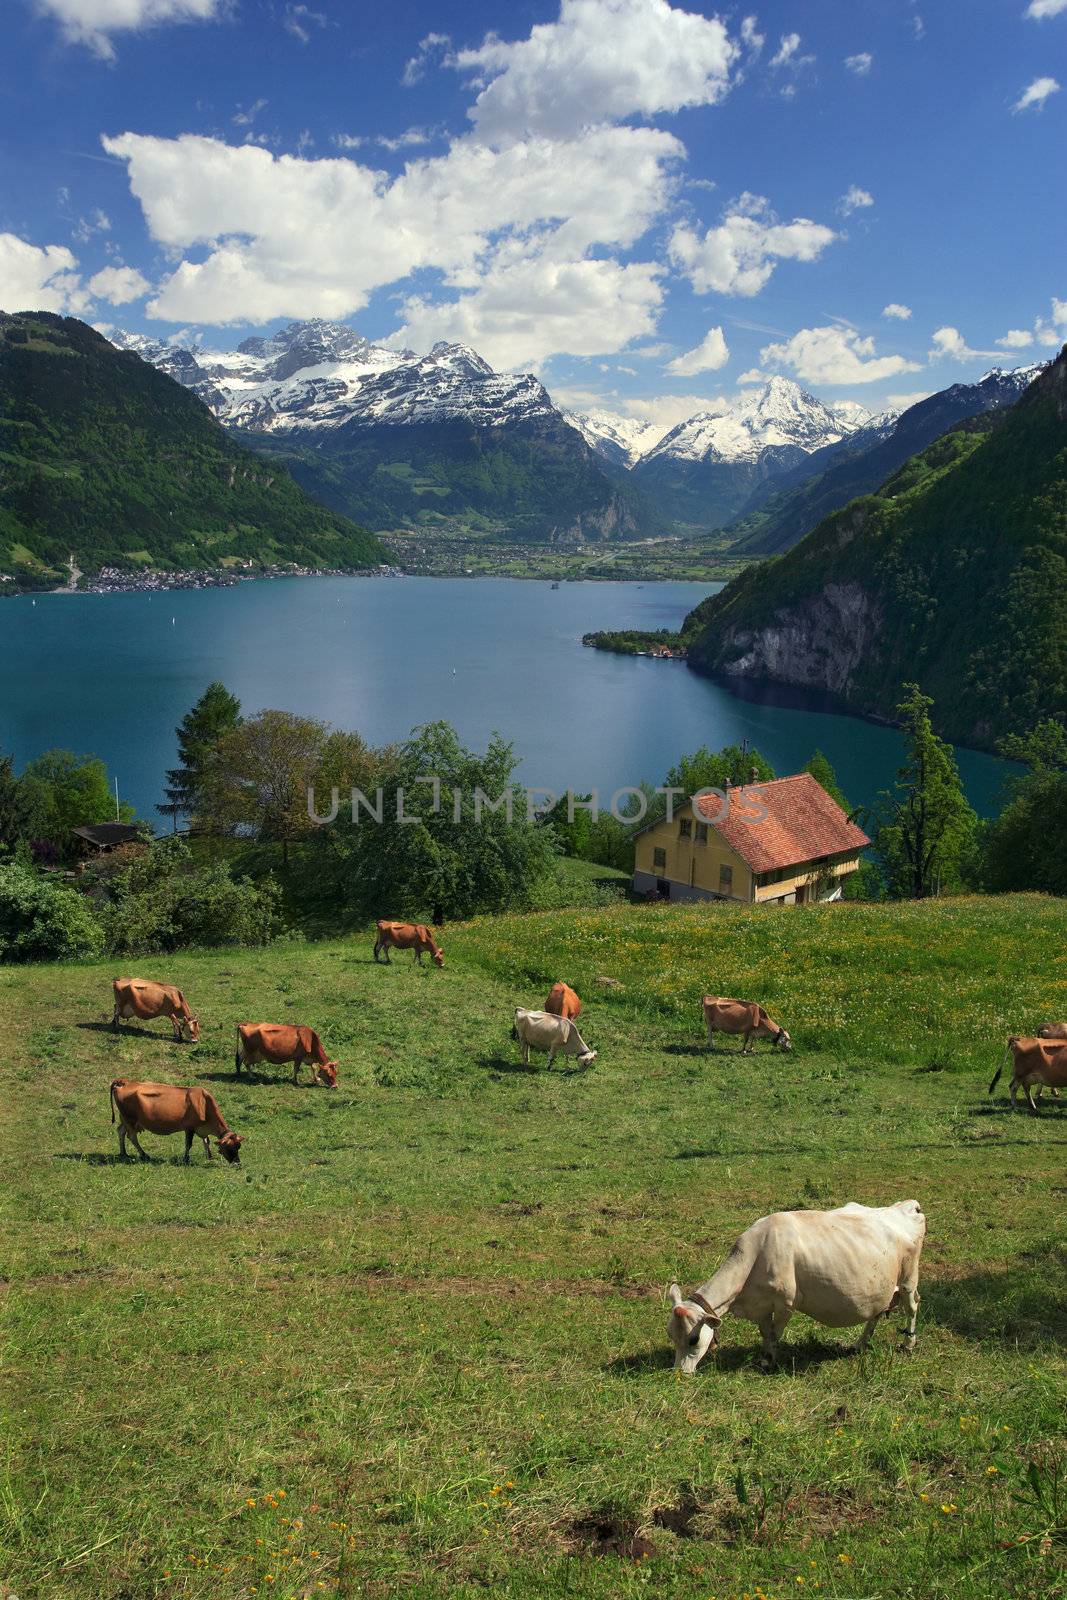 Lake Lucerne by sumners